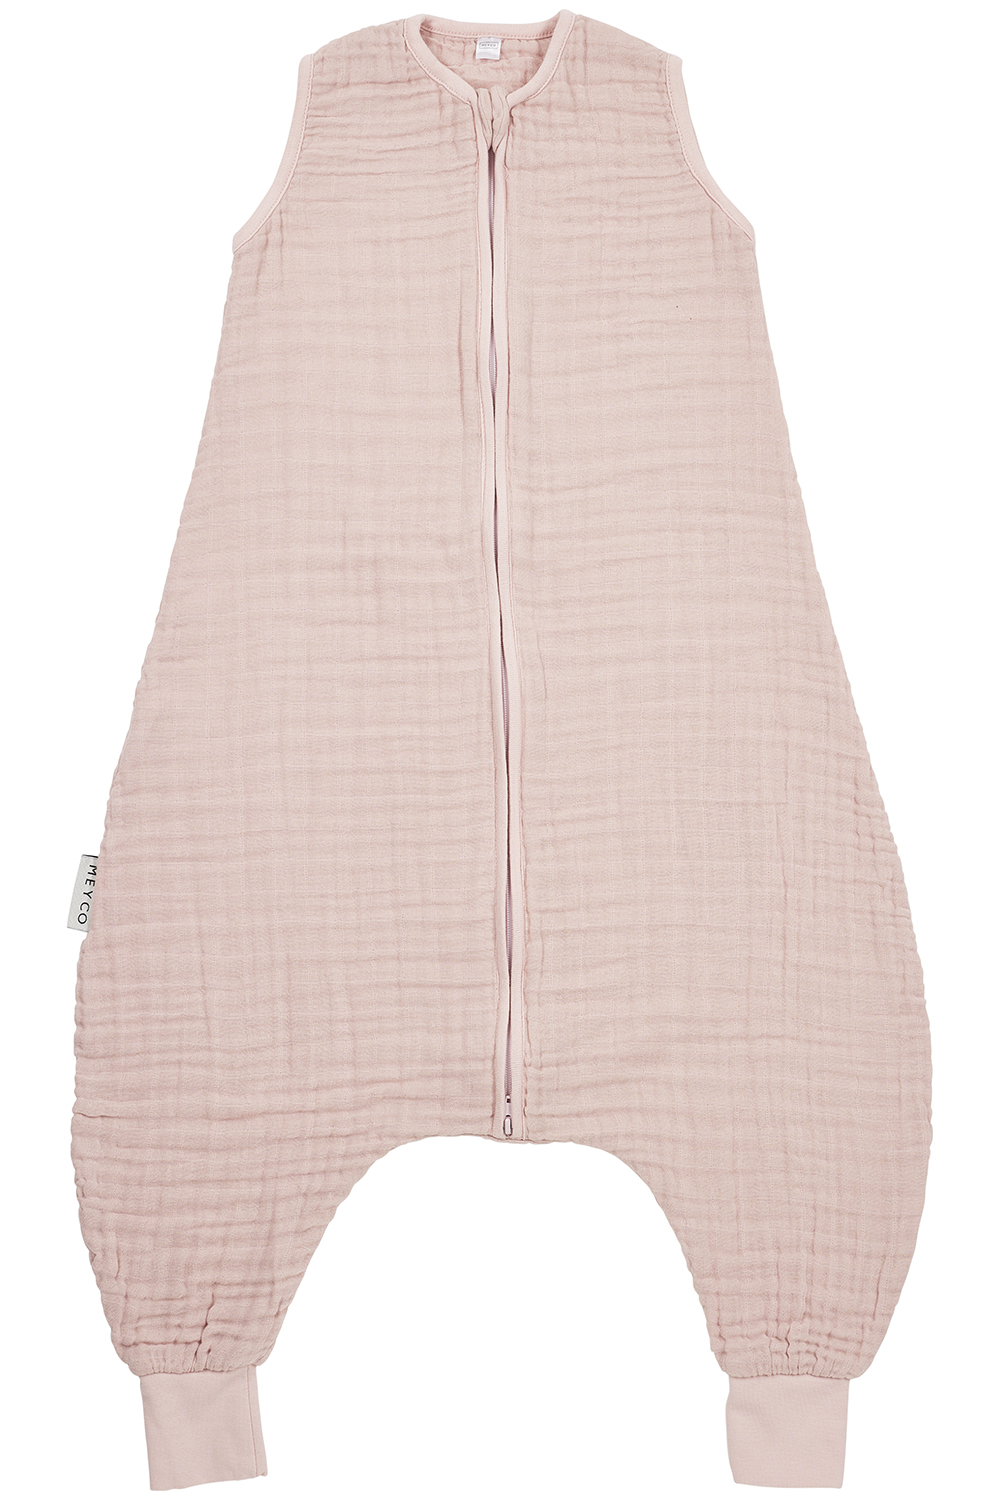 Baby sommer Schlafoverall Jumper pre-washed musselin Uni - soft pink - 80cm